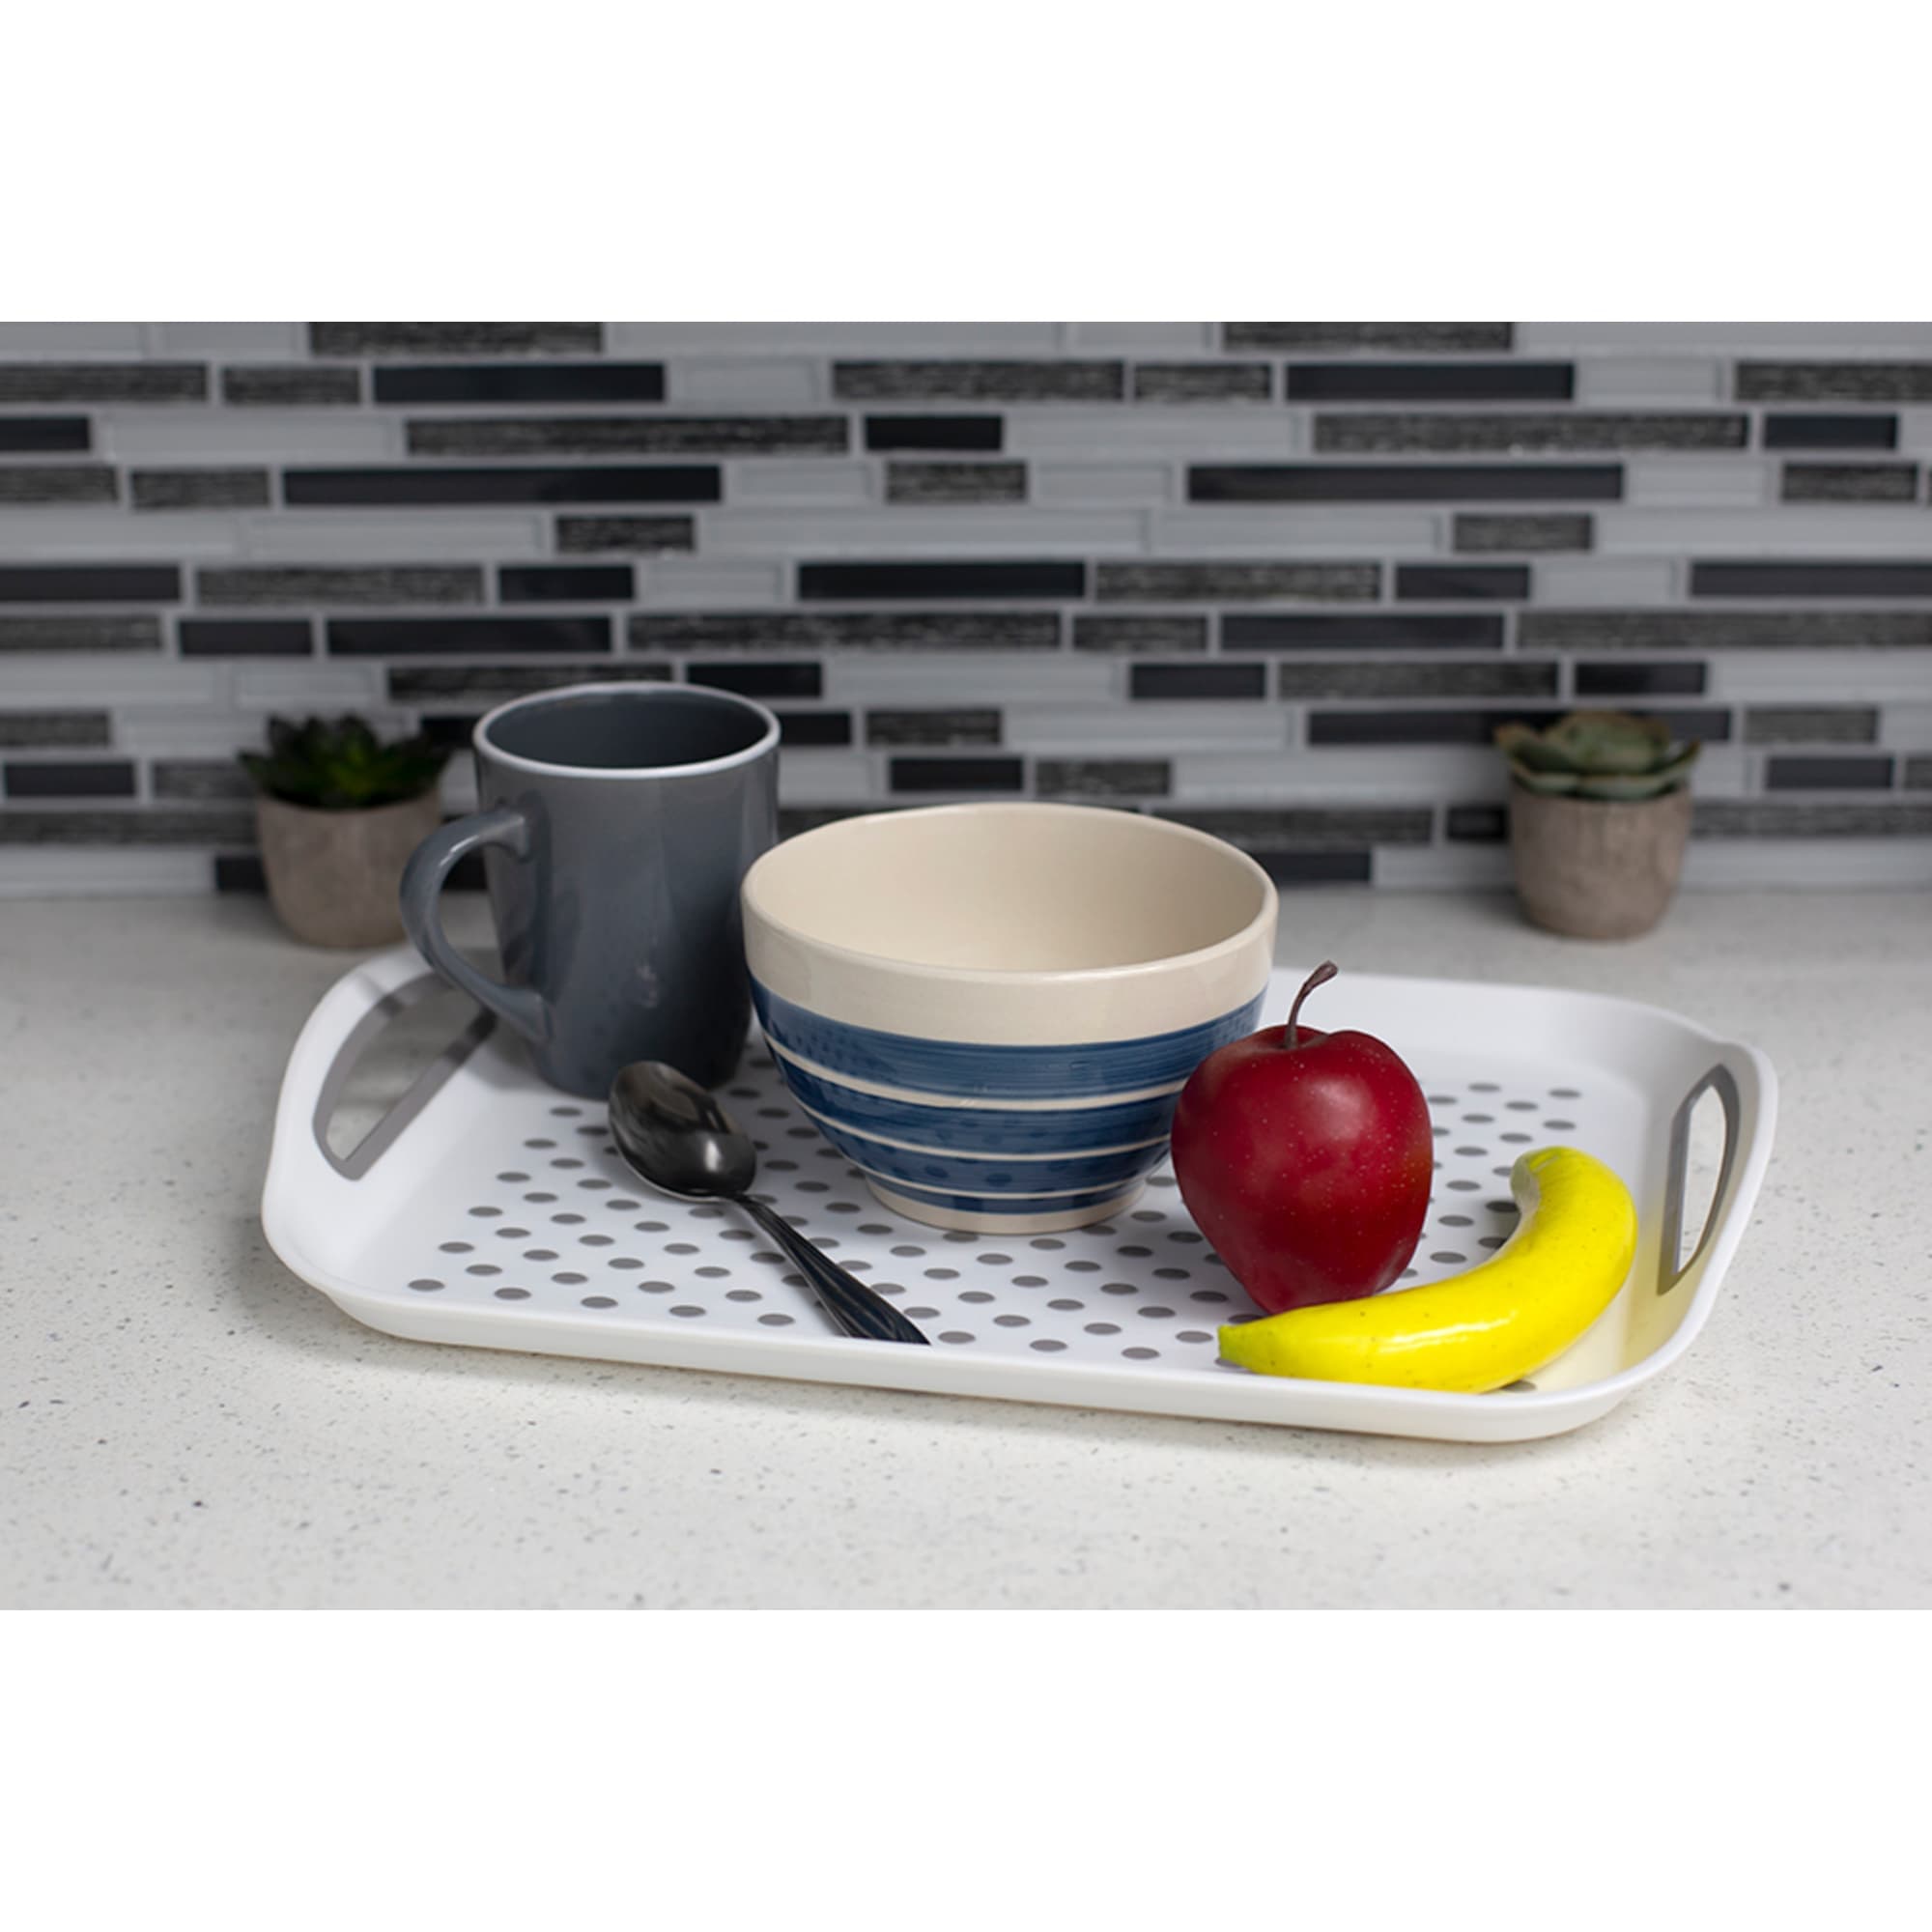 Home Basics Anti-Slip Plastic Serving Tray with Easy Grip Handles, White $3.00 EACH, CASE PACK OF 12